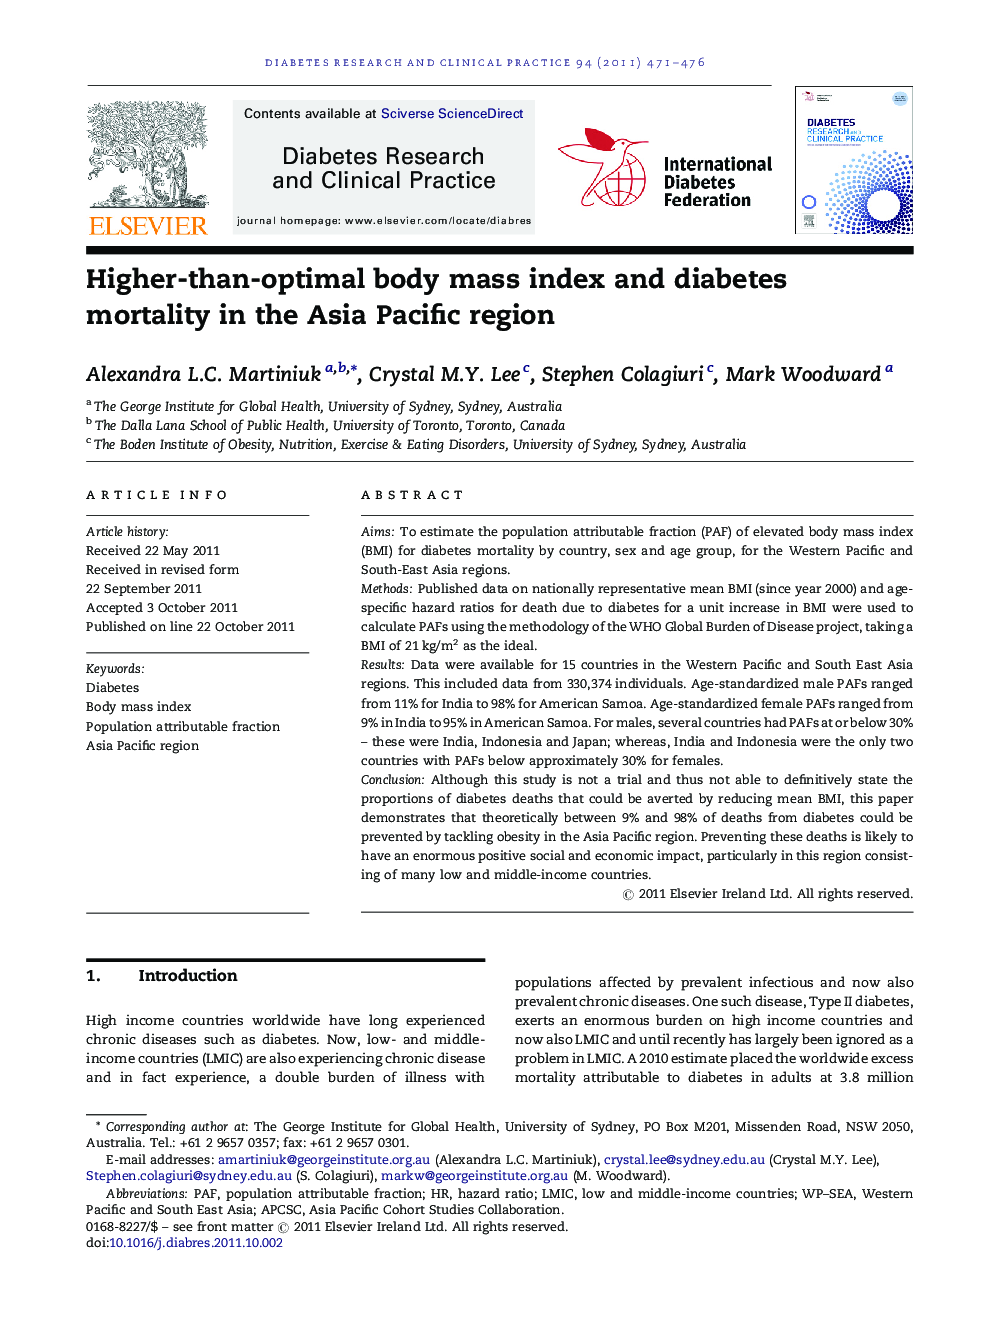 Higher-than-optimal body mass index and diabetes mortality in the Asia Pacific region